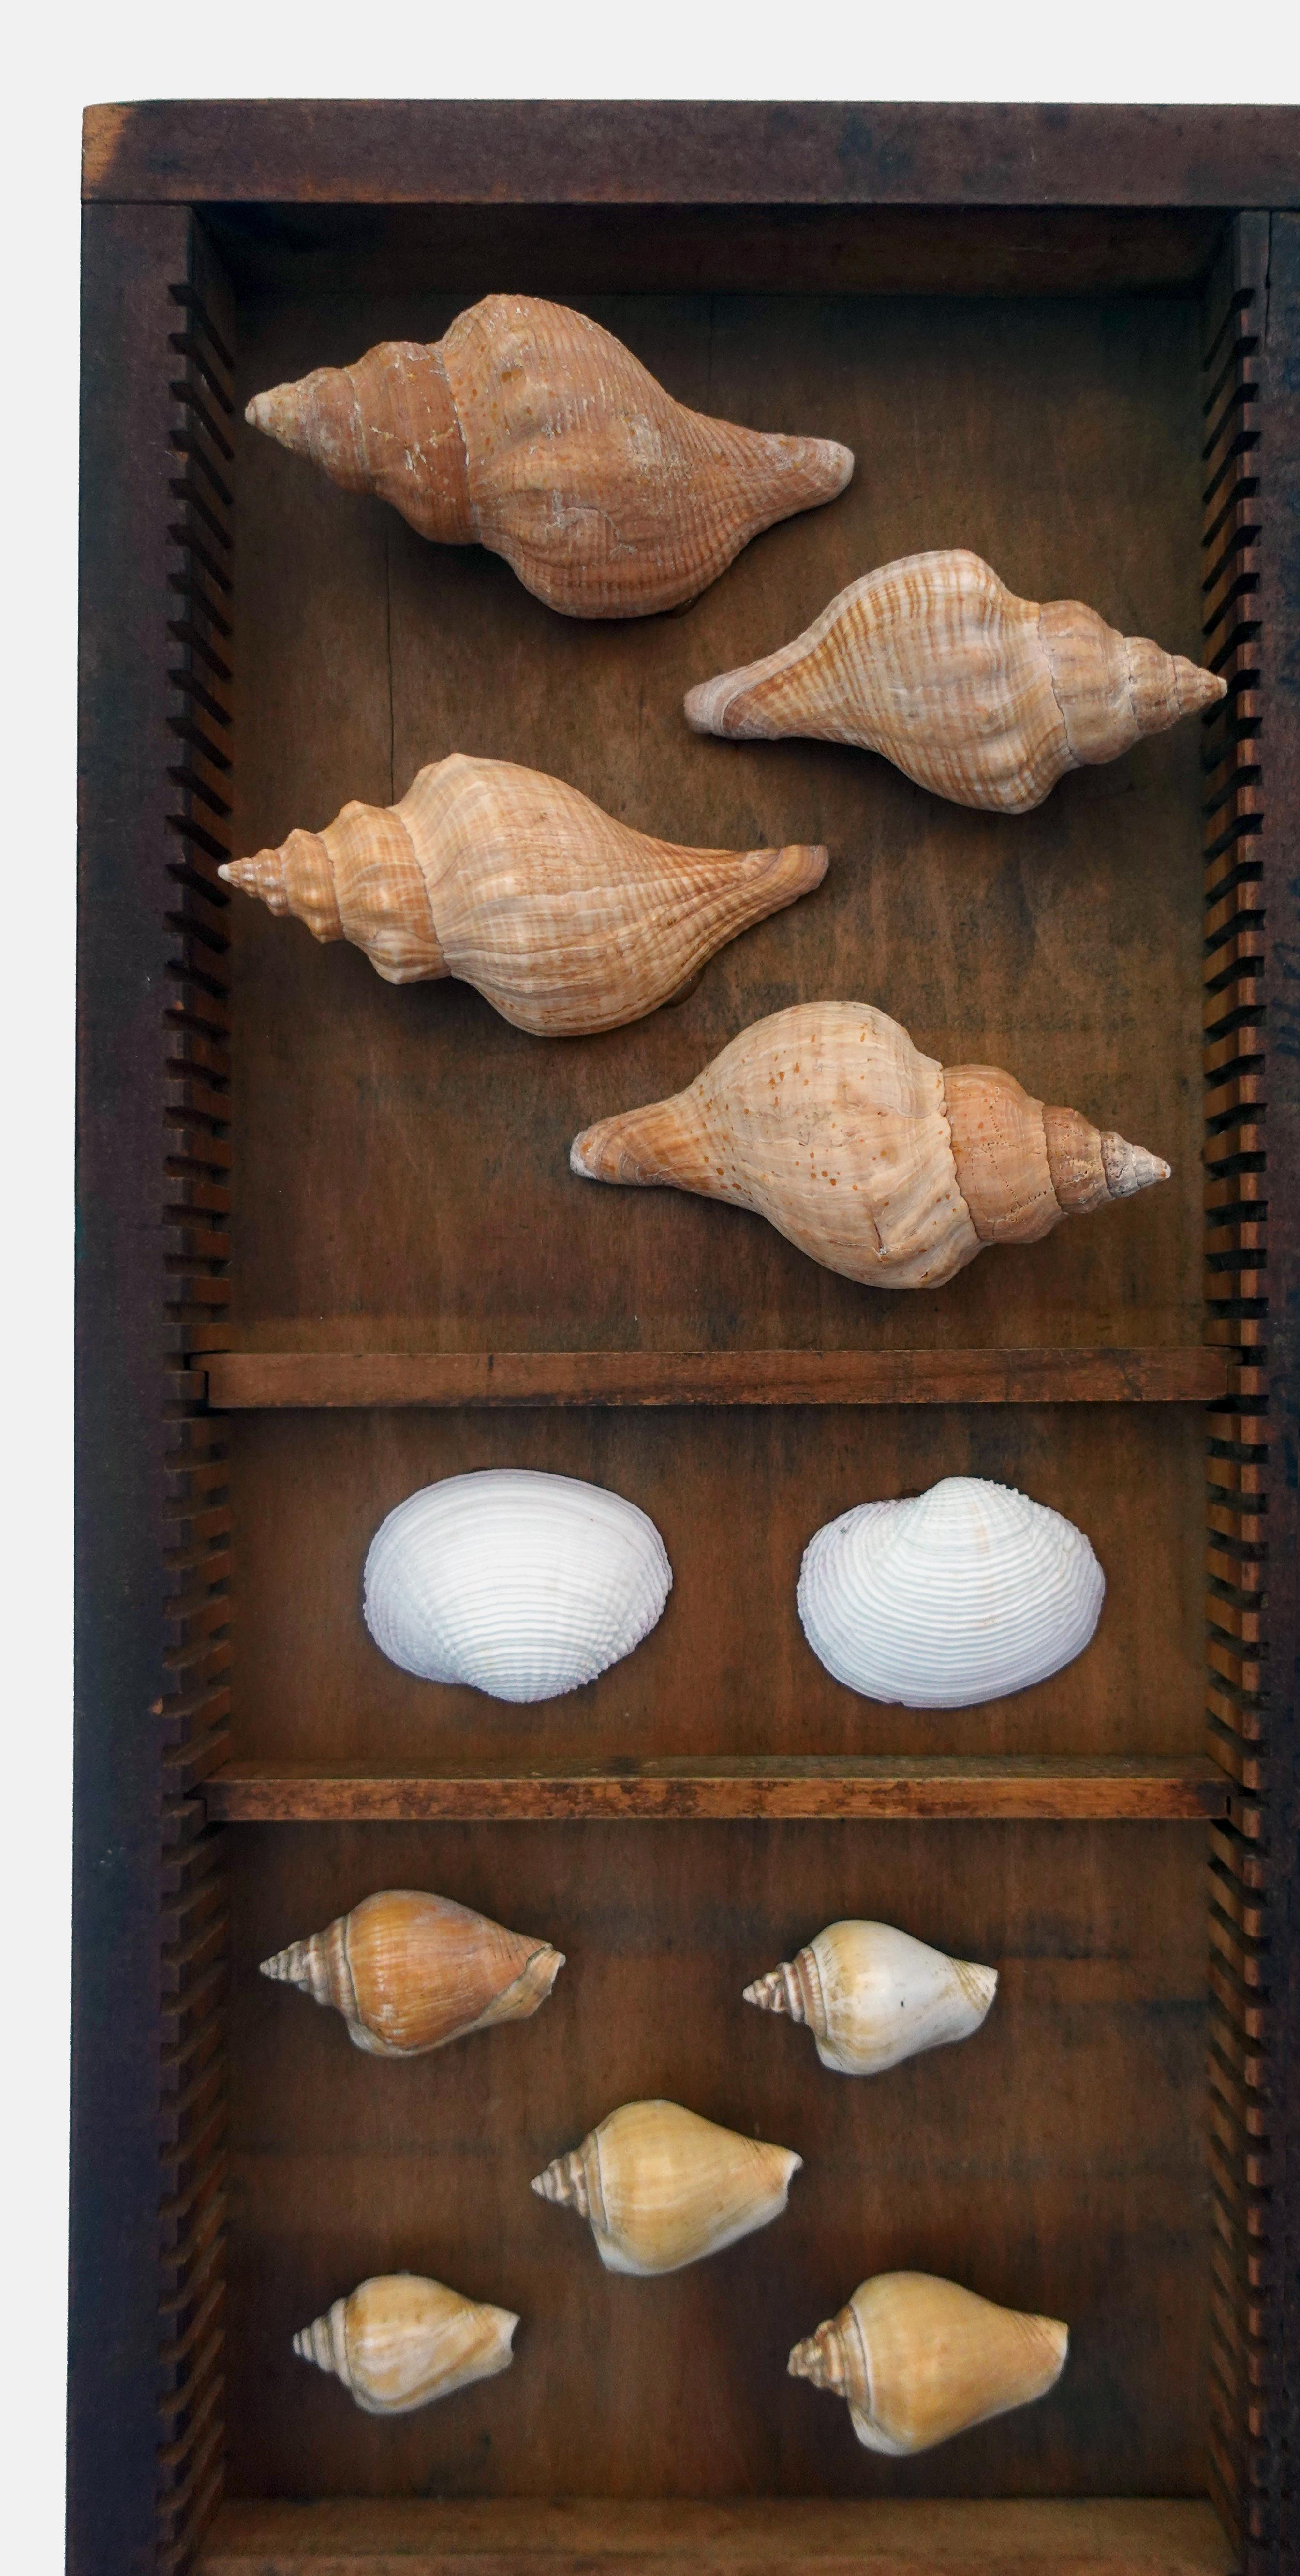 Curated shell collection 

Approximate size: 13.5 x 17.5 x 2 inches

A handsome collection of various mounted shells, including murex species, whelks, cones and spiny oysters. This ensemble forms part of a larger collection previously curated by the